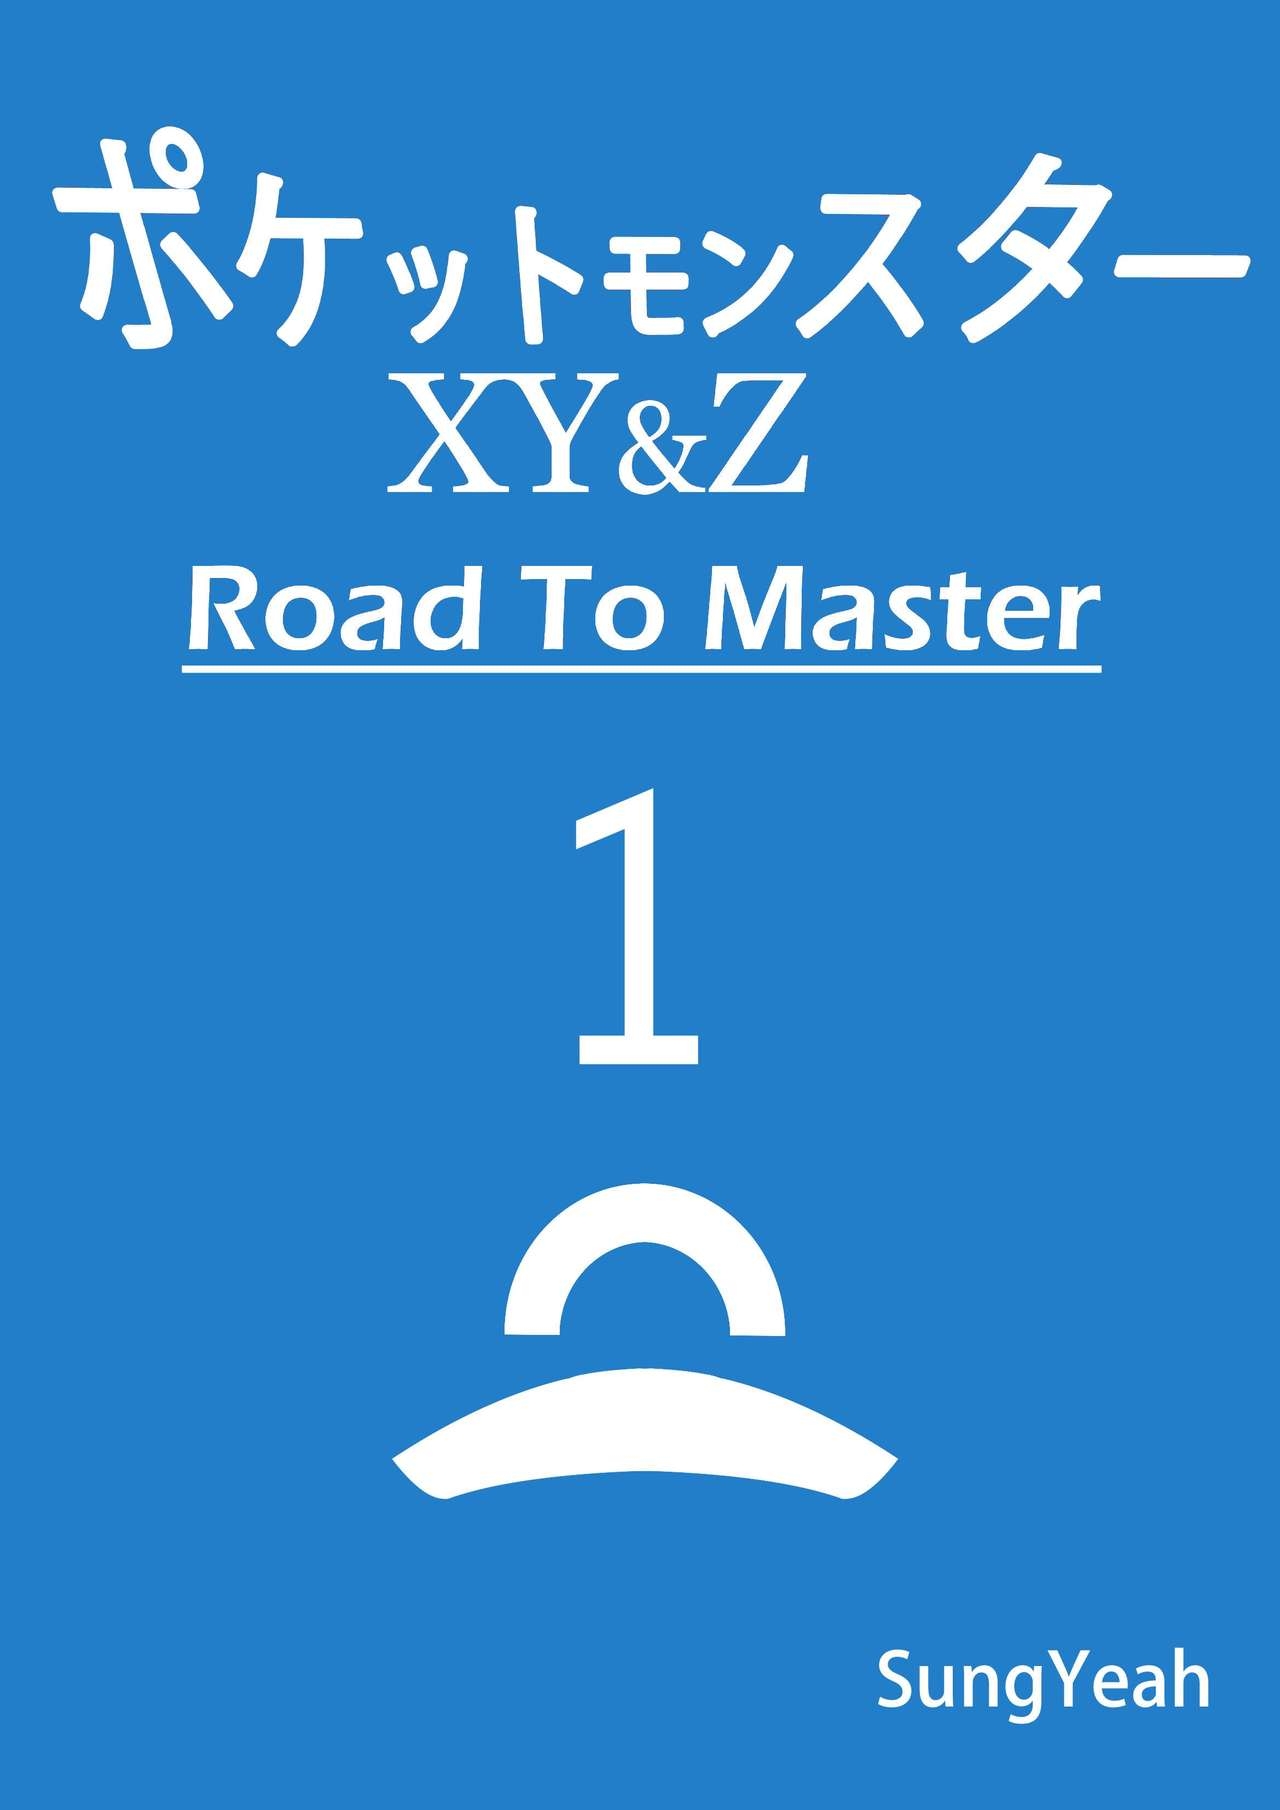 [Sungyeah] Pokemon - Road to Master - Complete 2